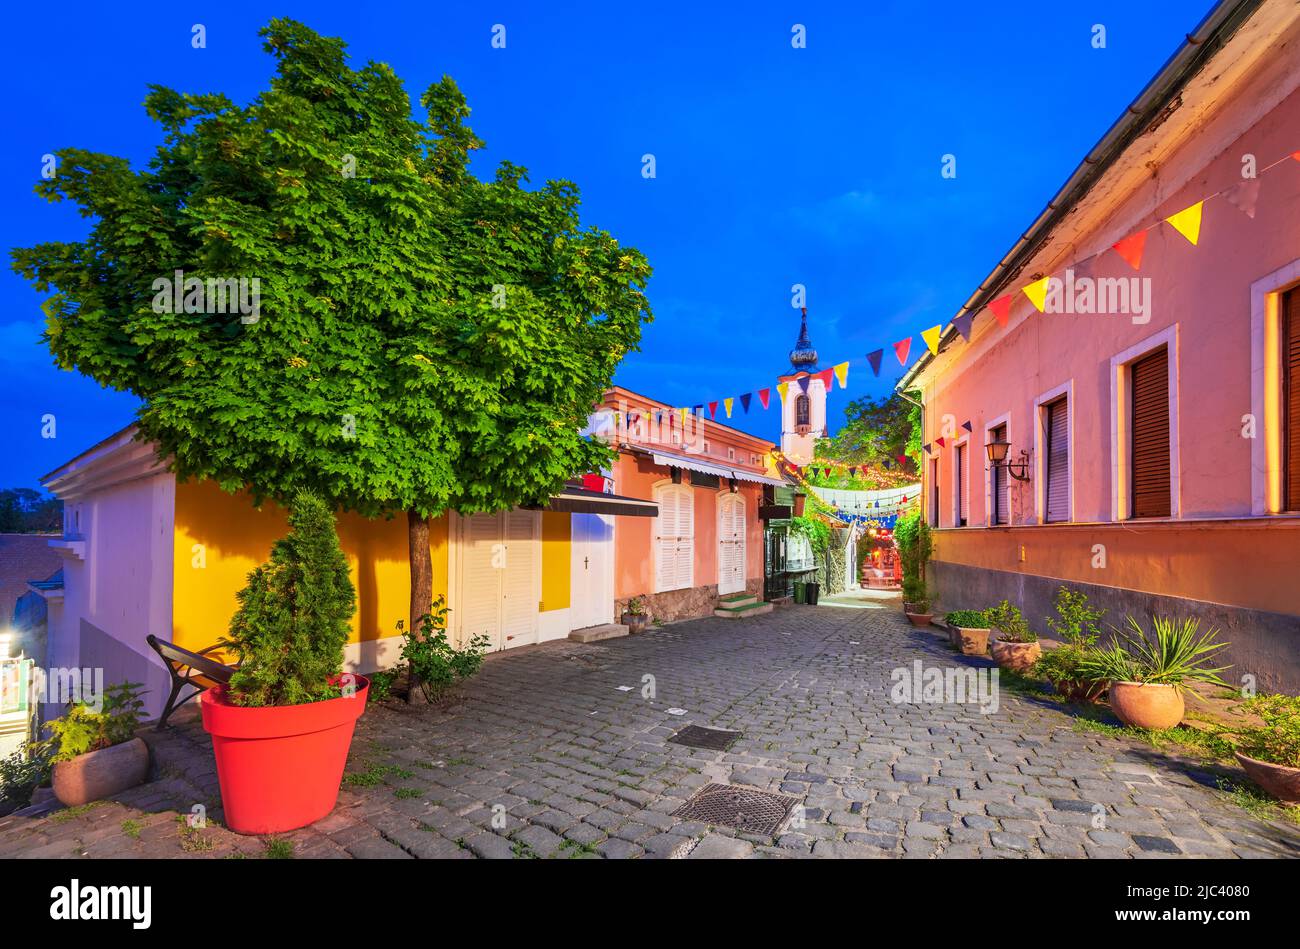 Szentendre, Hungary. City of arts near by Budapest, famous and beautiful historical downtown, Danube riverbank. Stock Photo